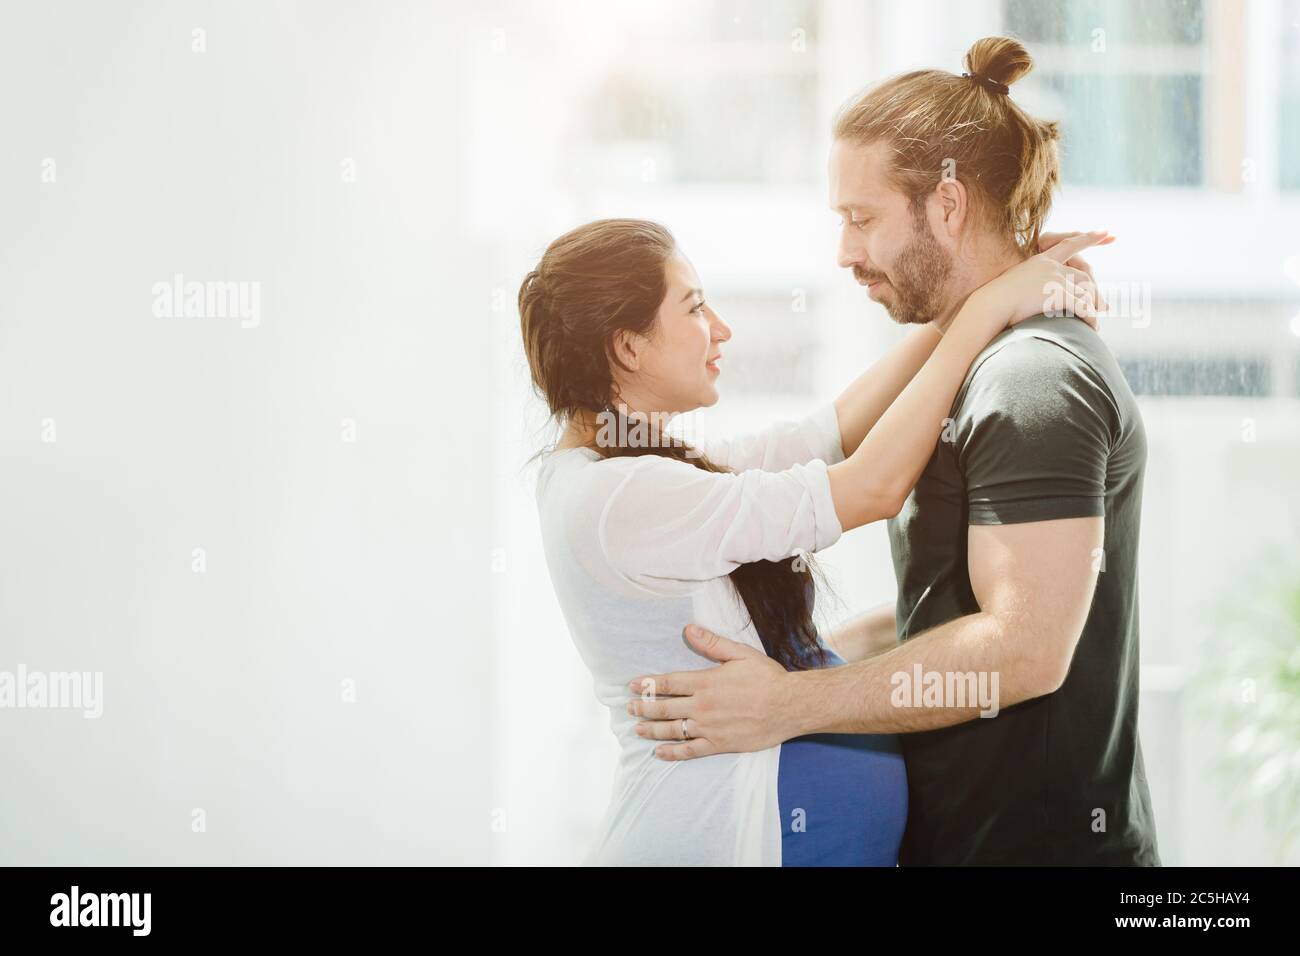 Pregnant woman wife standing, embracing the husband, looking together with love and connection, showing the warmth of couple lovers Stock Photo